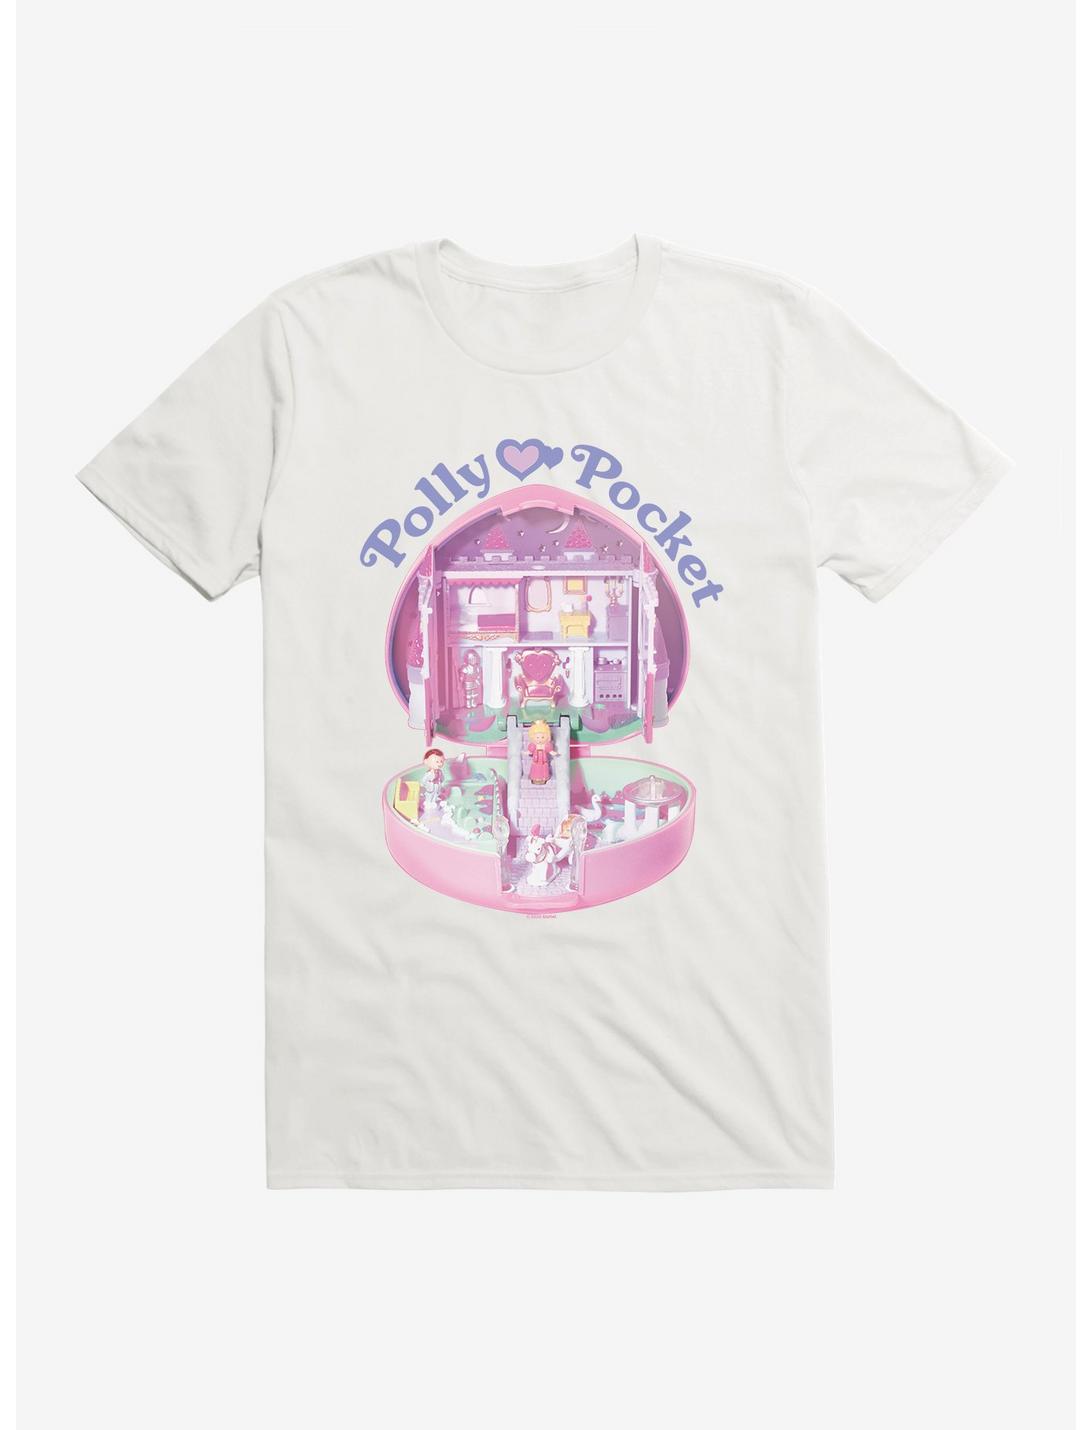 Polly Pocket Come Play T-Shirt, WHITE, hi-res